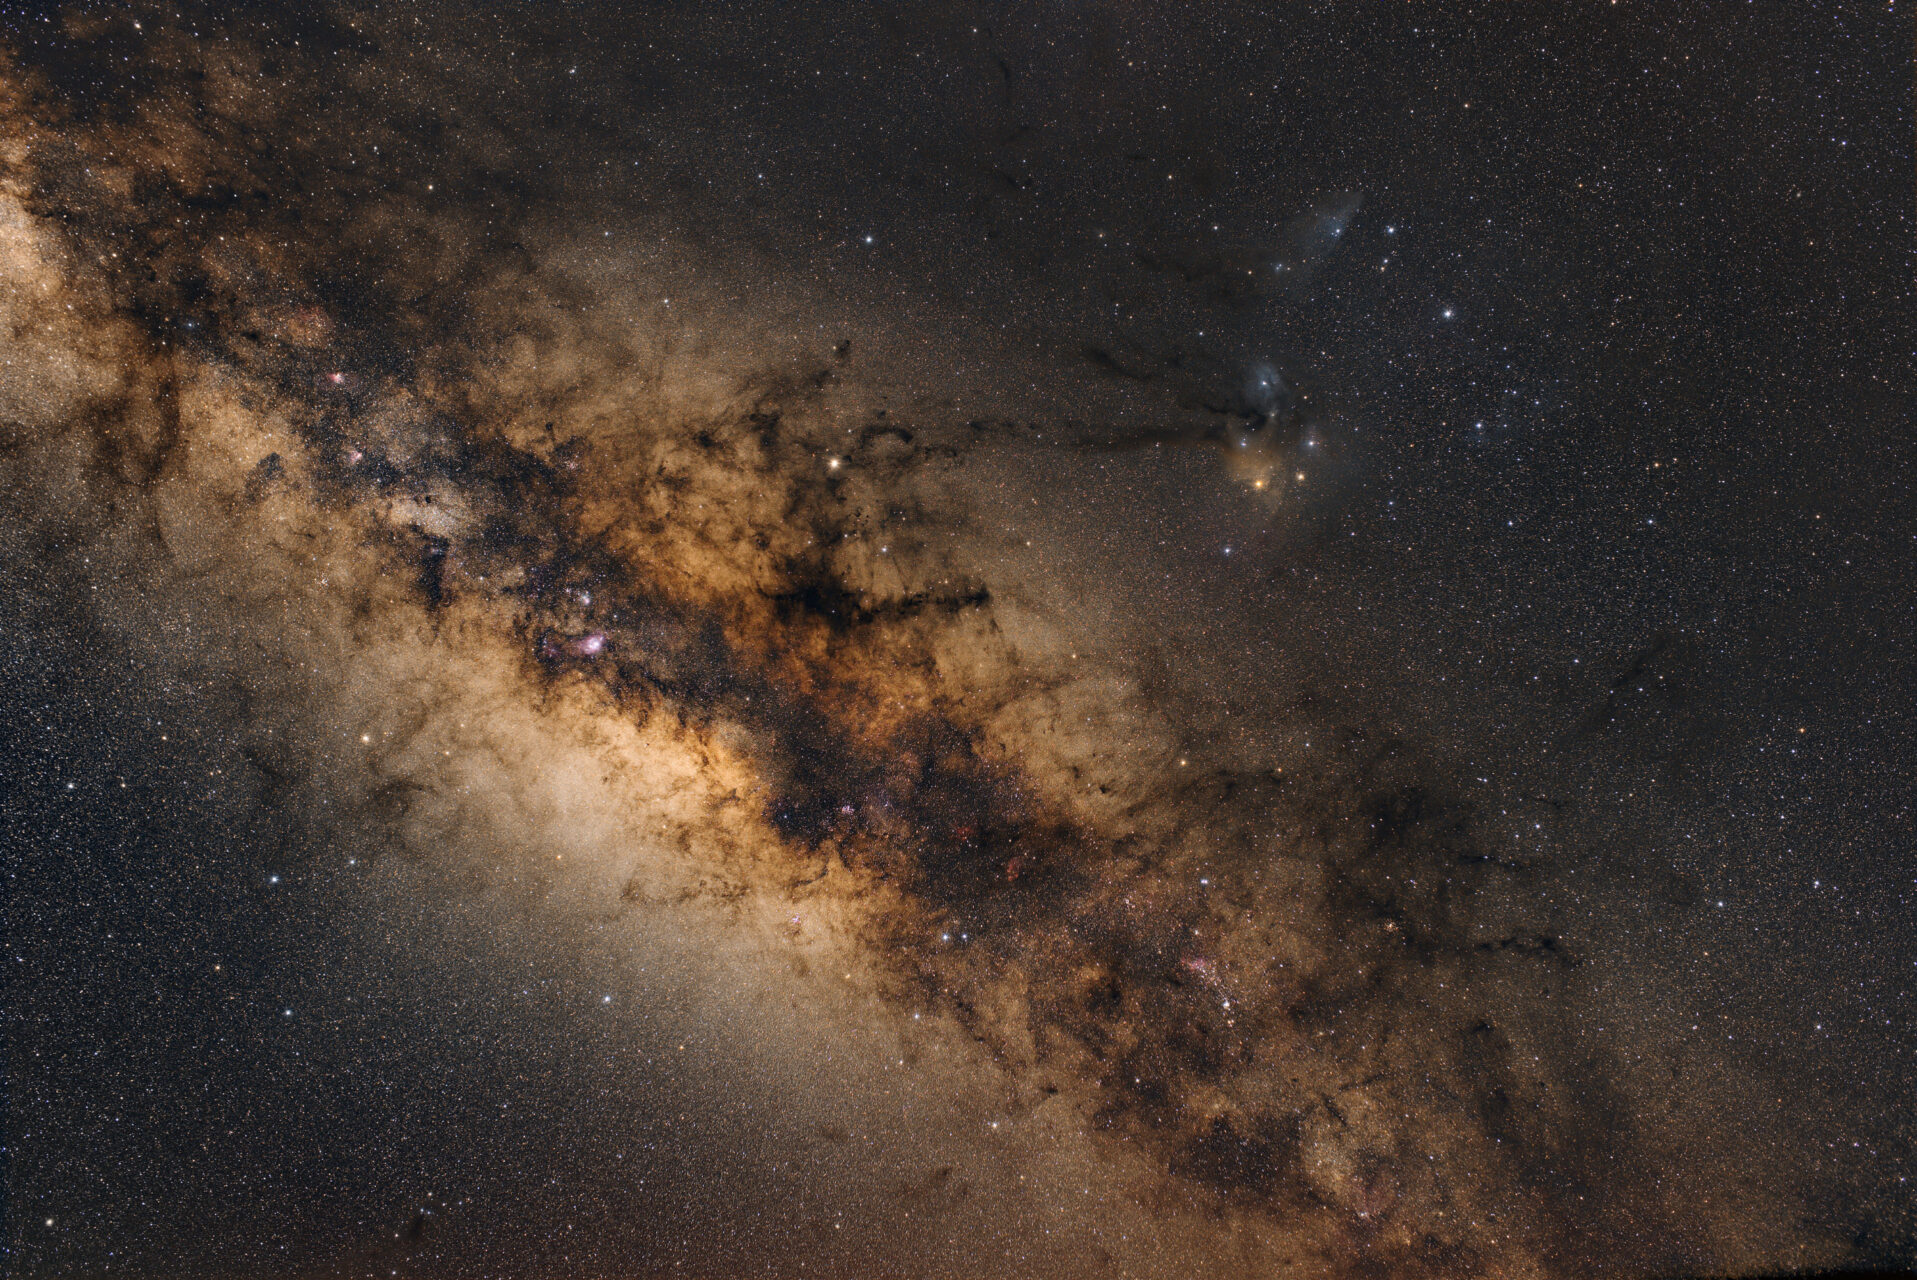 UNLISTED Milky Way